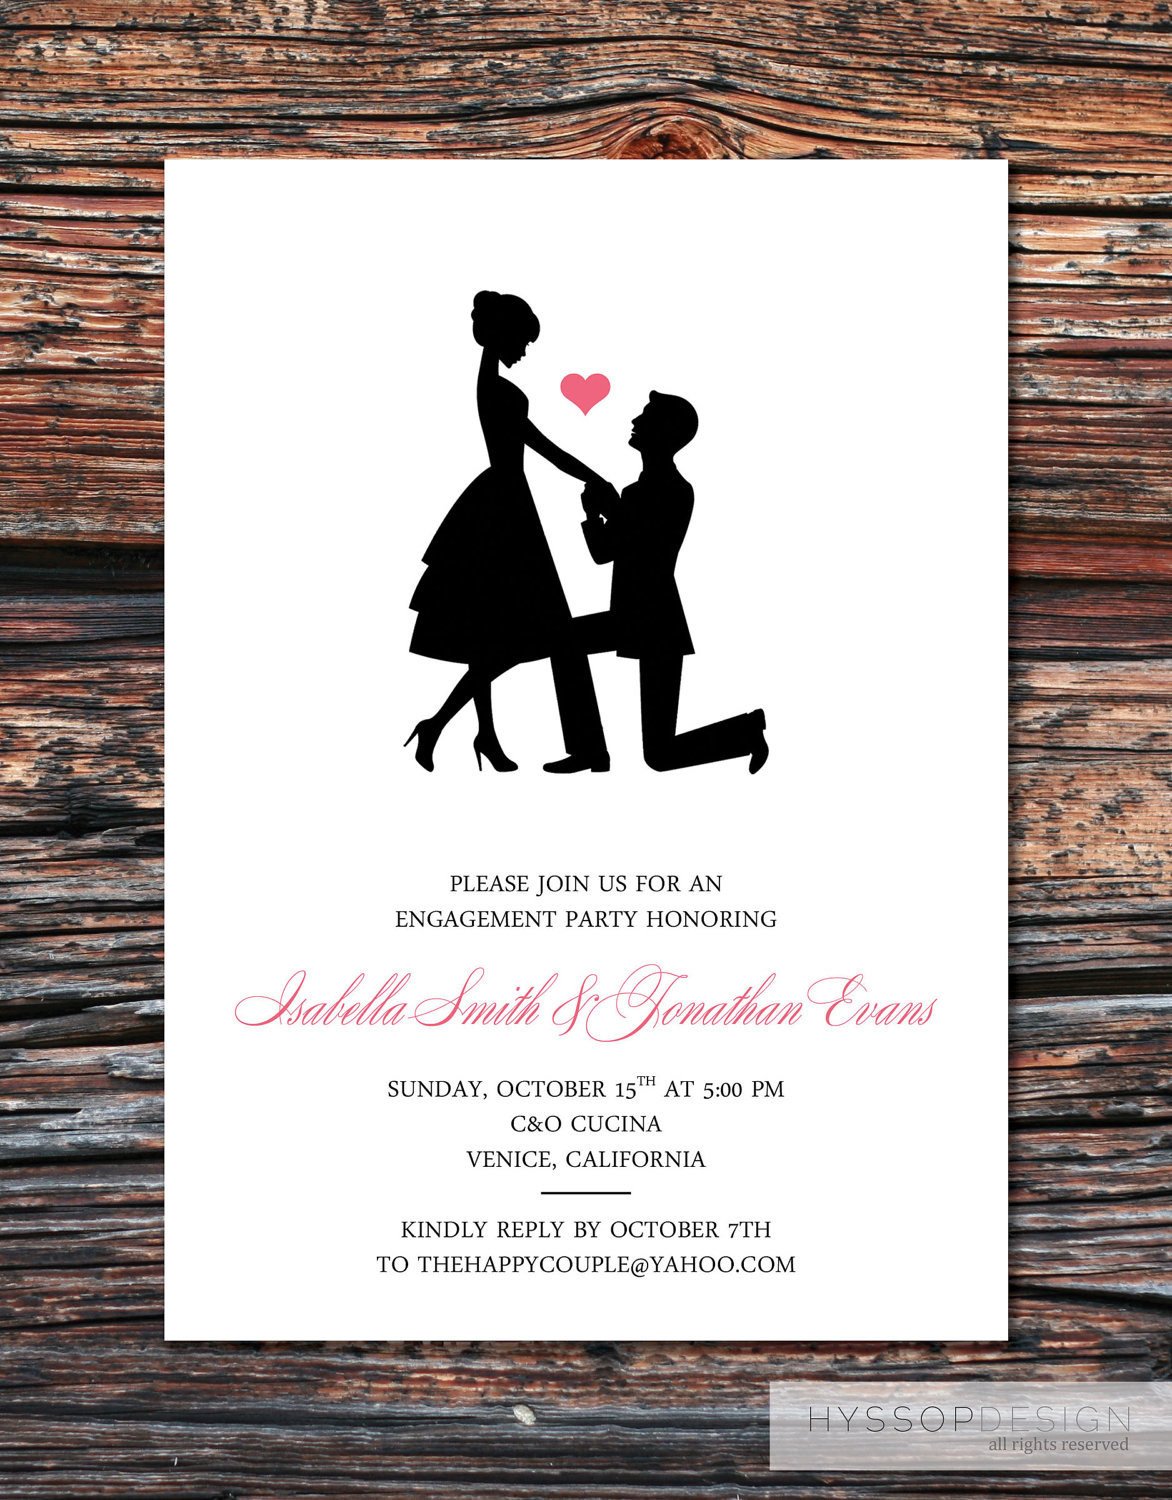 Engagement Party Invitation Templates Printable Diy Sweet Silhouette Proposal by Hyssopdesign On